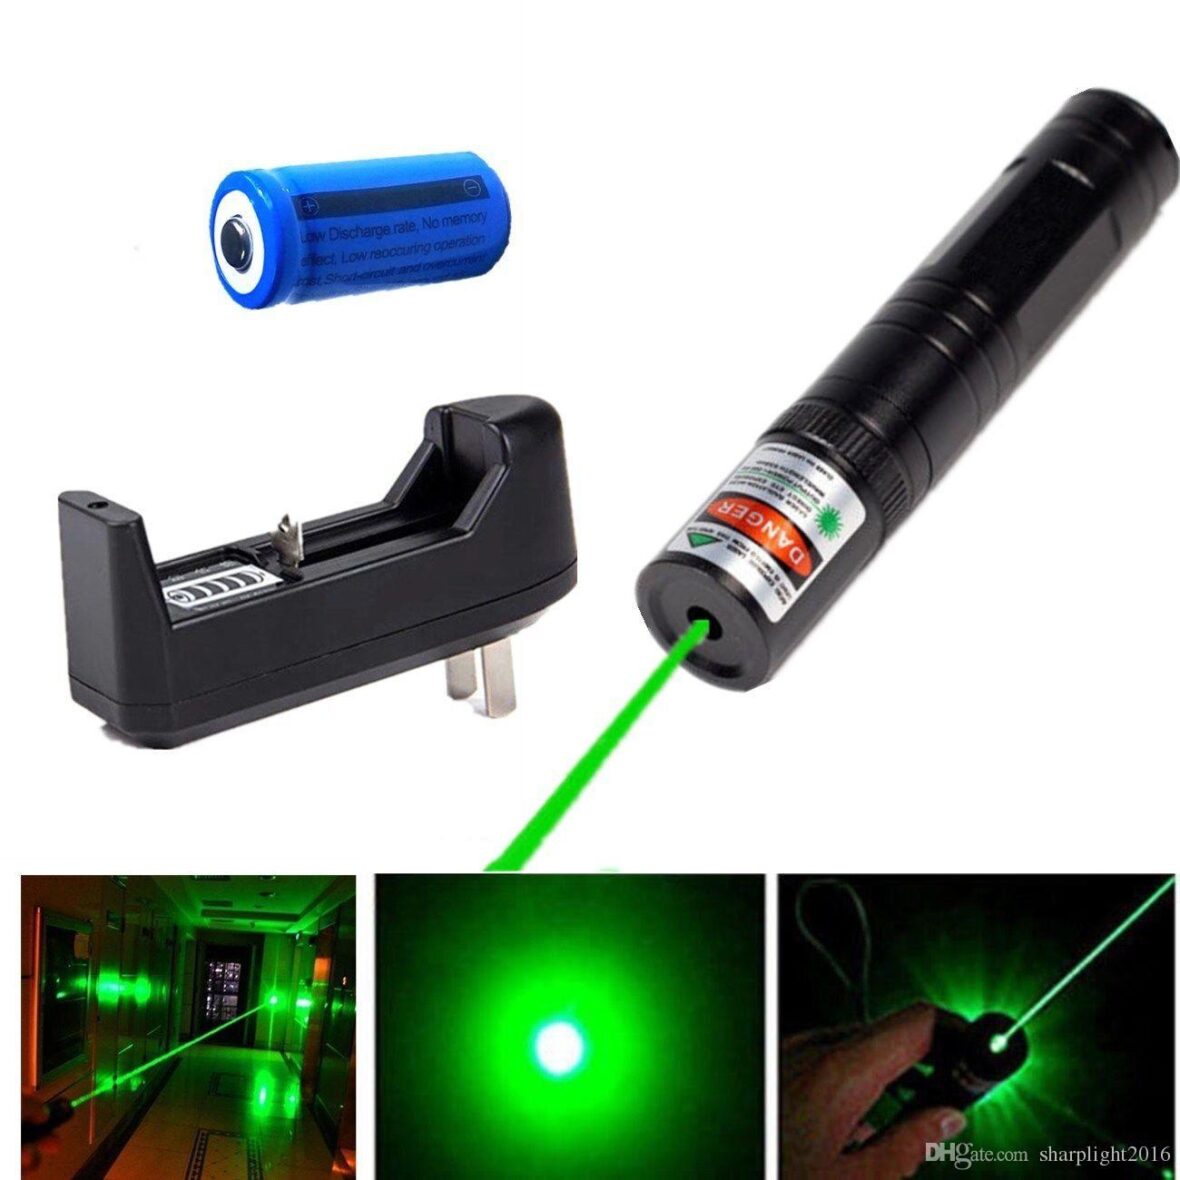 Laser Light Multi New Green Ray Lazer Pointer Pen Visible Beam With Star Head Caps